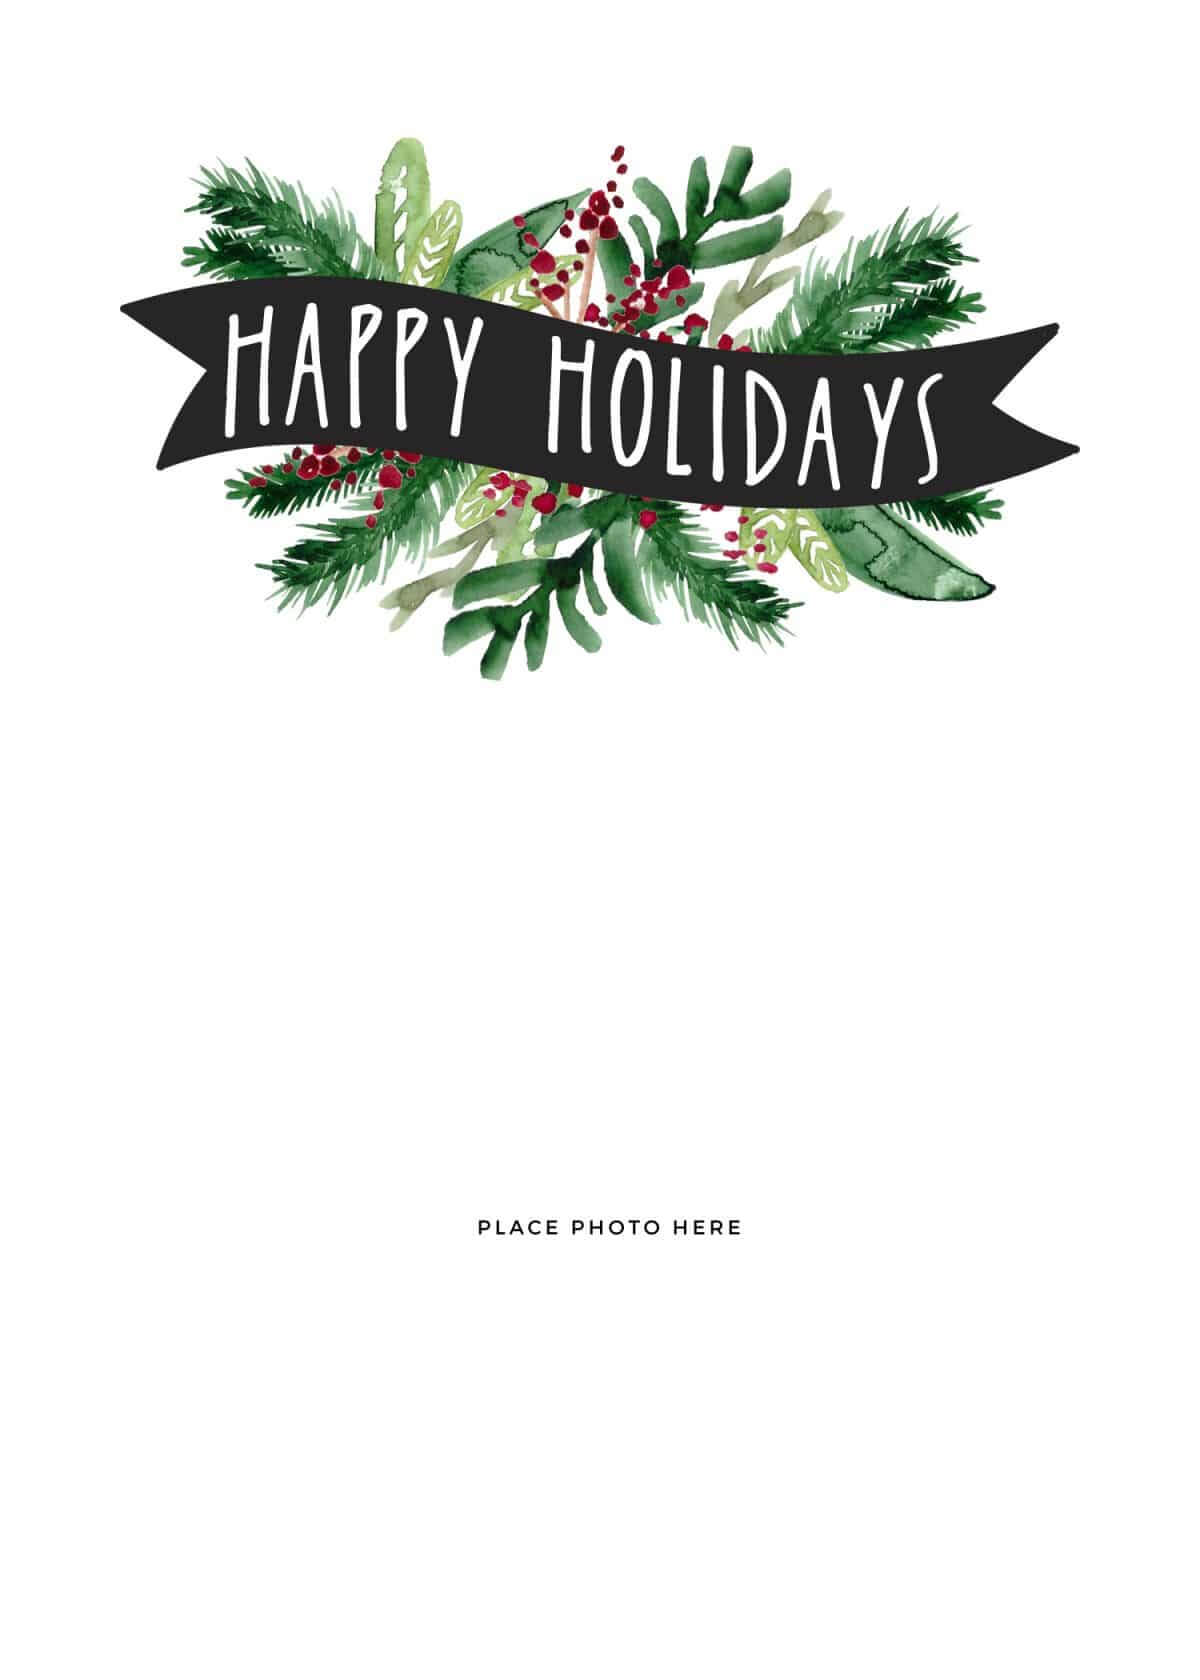 Make Your Own Photo Christmas Cards (For Free!) – Somewhat Intended For Christmas Photo Cards Templates Free Downloads